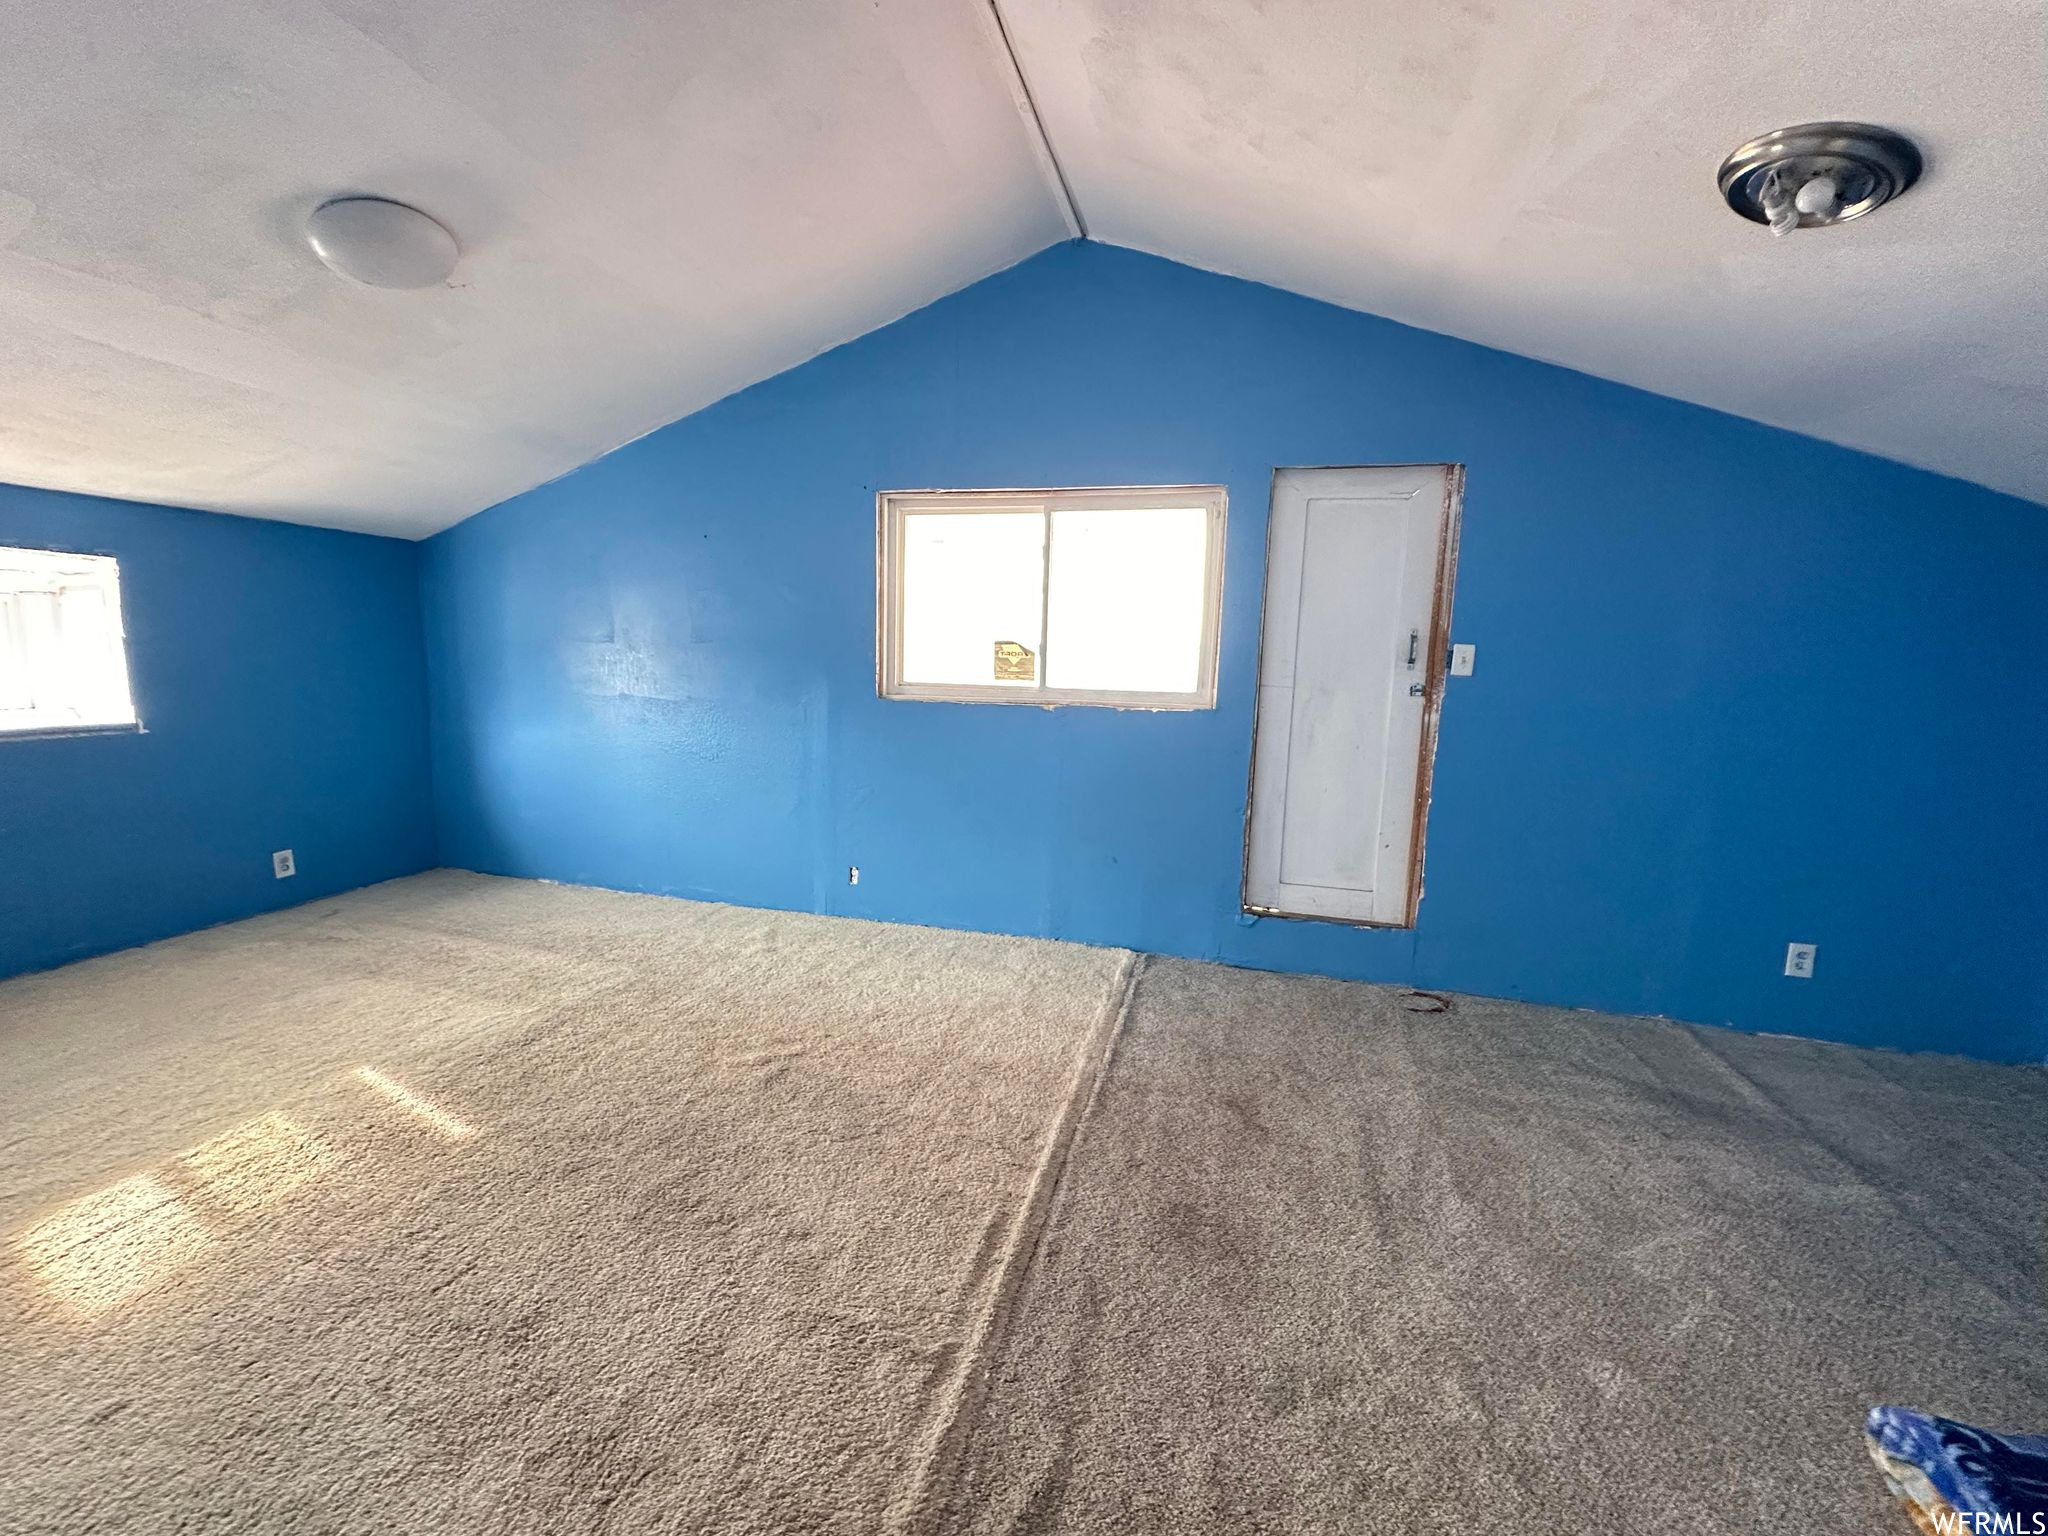 Bonus room with vaulted ceiling and carpet